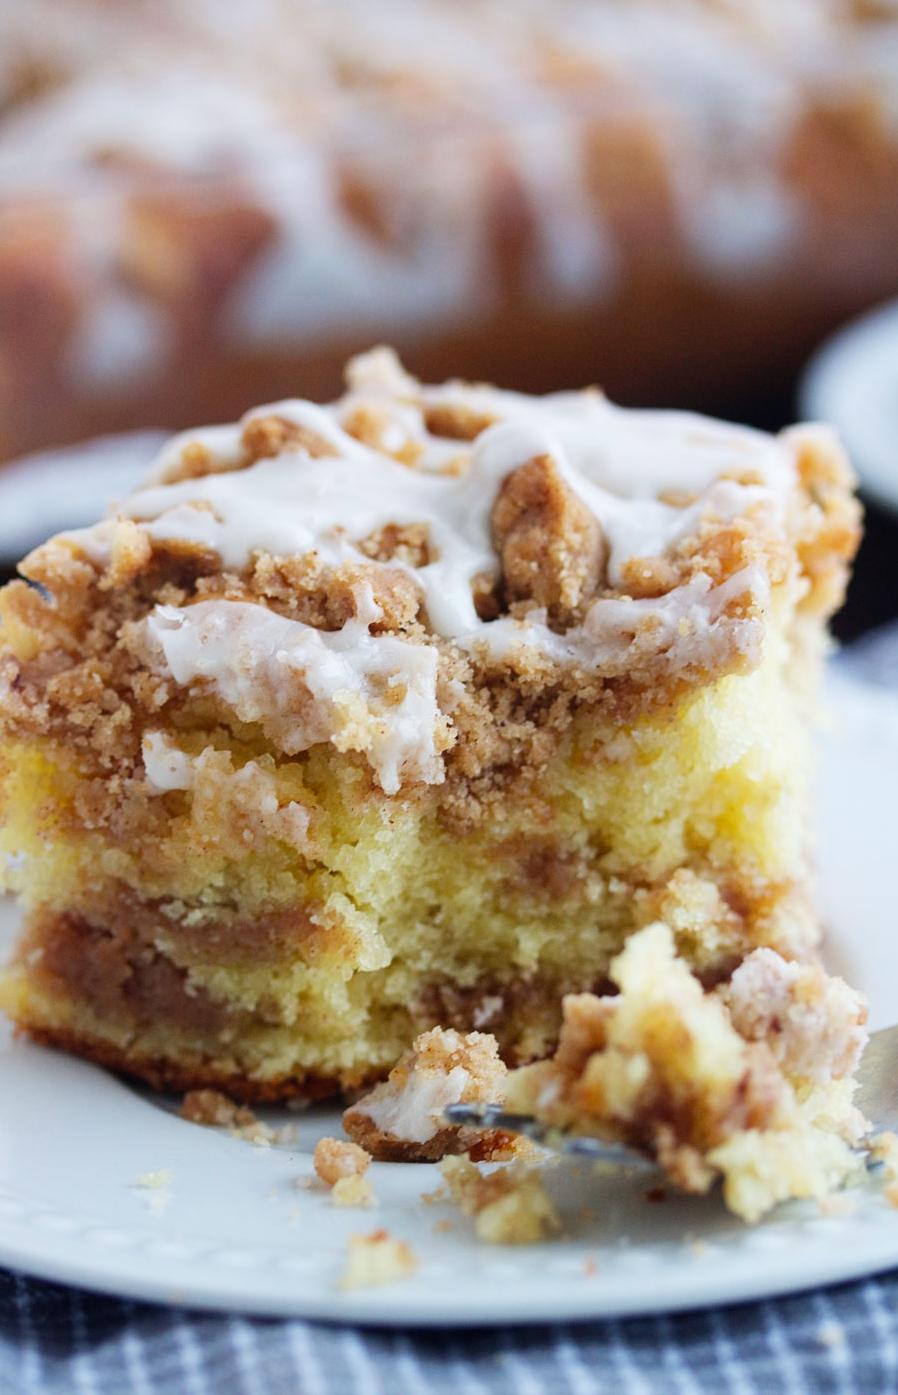  Sprinkle some powdered sugar on top for an extra touch of sweetness.